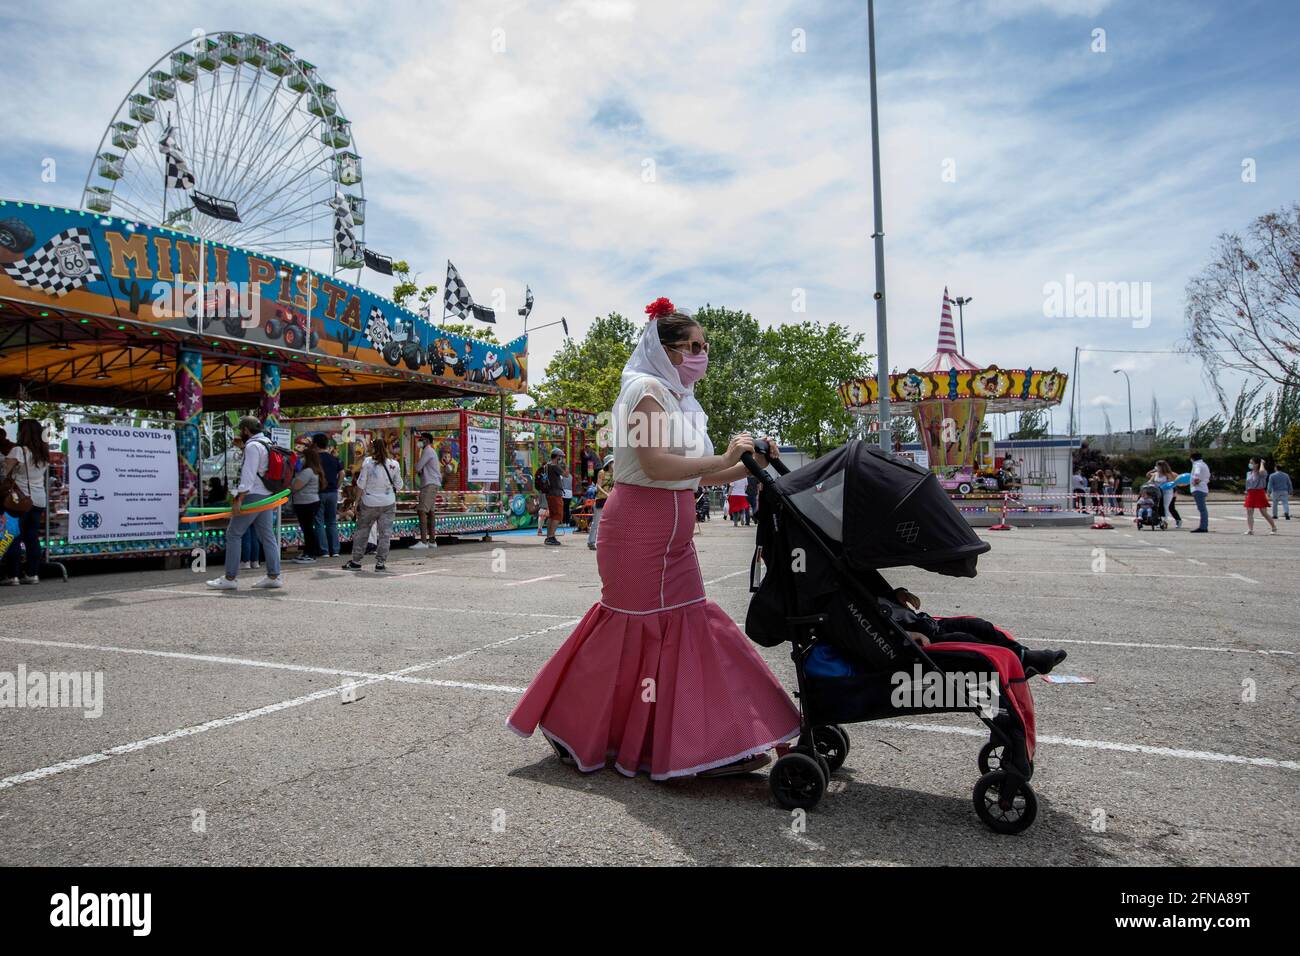 Madrid, Spain. 15th May, 2021. A woman pushing a baby stroller dressed as a chulapa seen during the San Isidro festivity in the IFEMA fairground.One of the most celebrated holidays of Madrid is the Feast Day of San Isidro which this year took place in the IFEMA fairground. Credit: SOPA Images Limited/Alamy Live News Stock Photo